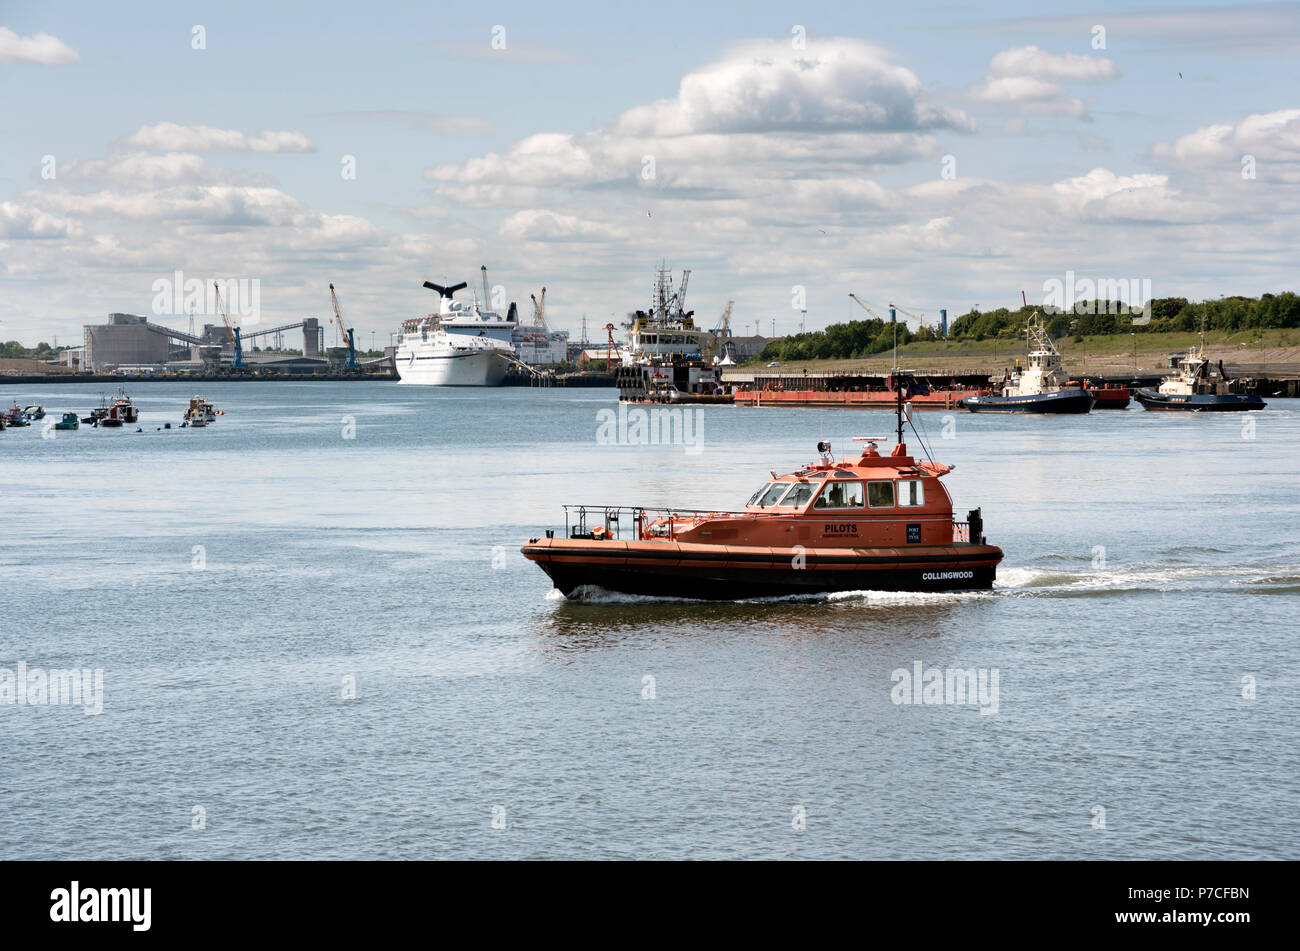 A pilot boat crosses the River Tyne, with a ship docked at the Ferry Port in the background, North Shields, Tyneside, UK Stock Photo